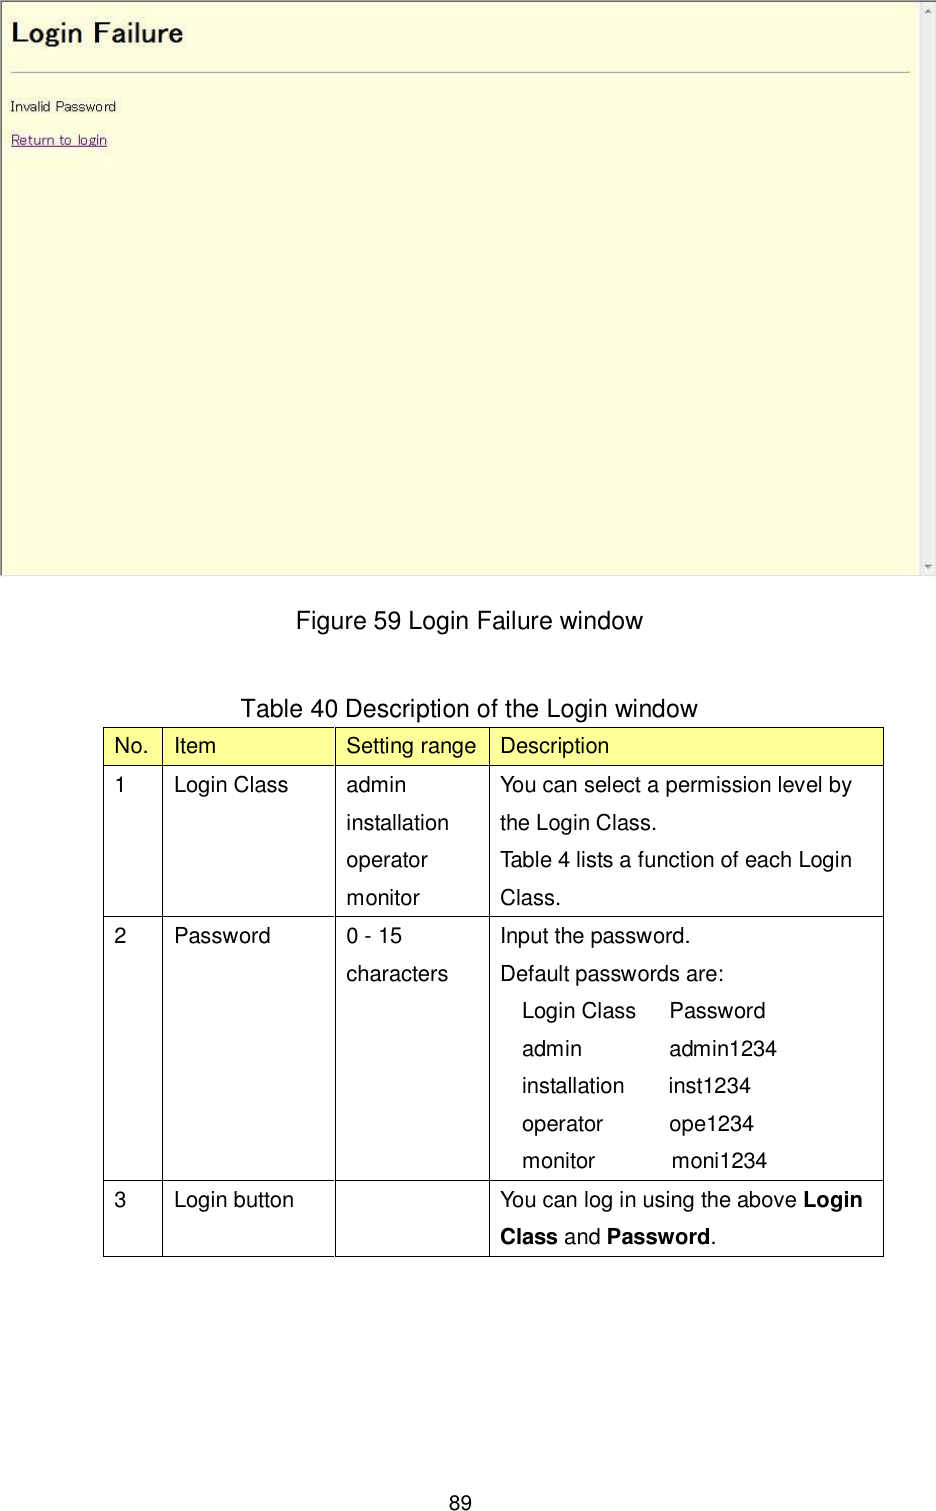    89  Figure 59 Login Failure window  Table 40 Description of the Login window No. Item  Setting range Description 1  Login Class  admin installation operator monitor You can select a permission level by the Login Class. Table 4 lists a function of each Login Class. 2  Password  0 - 15 characters Input the password. Default passwords are: Login Class      Password admin                admin1234 installation        inst1234 operator            ope1234 monitor              moni1234 3  Login button    You can log in using the above Login Class and Password.  